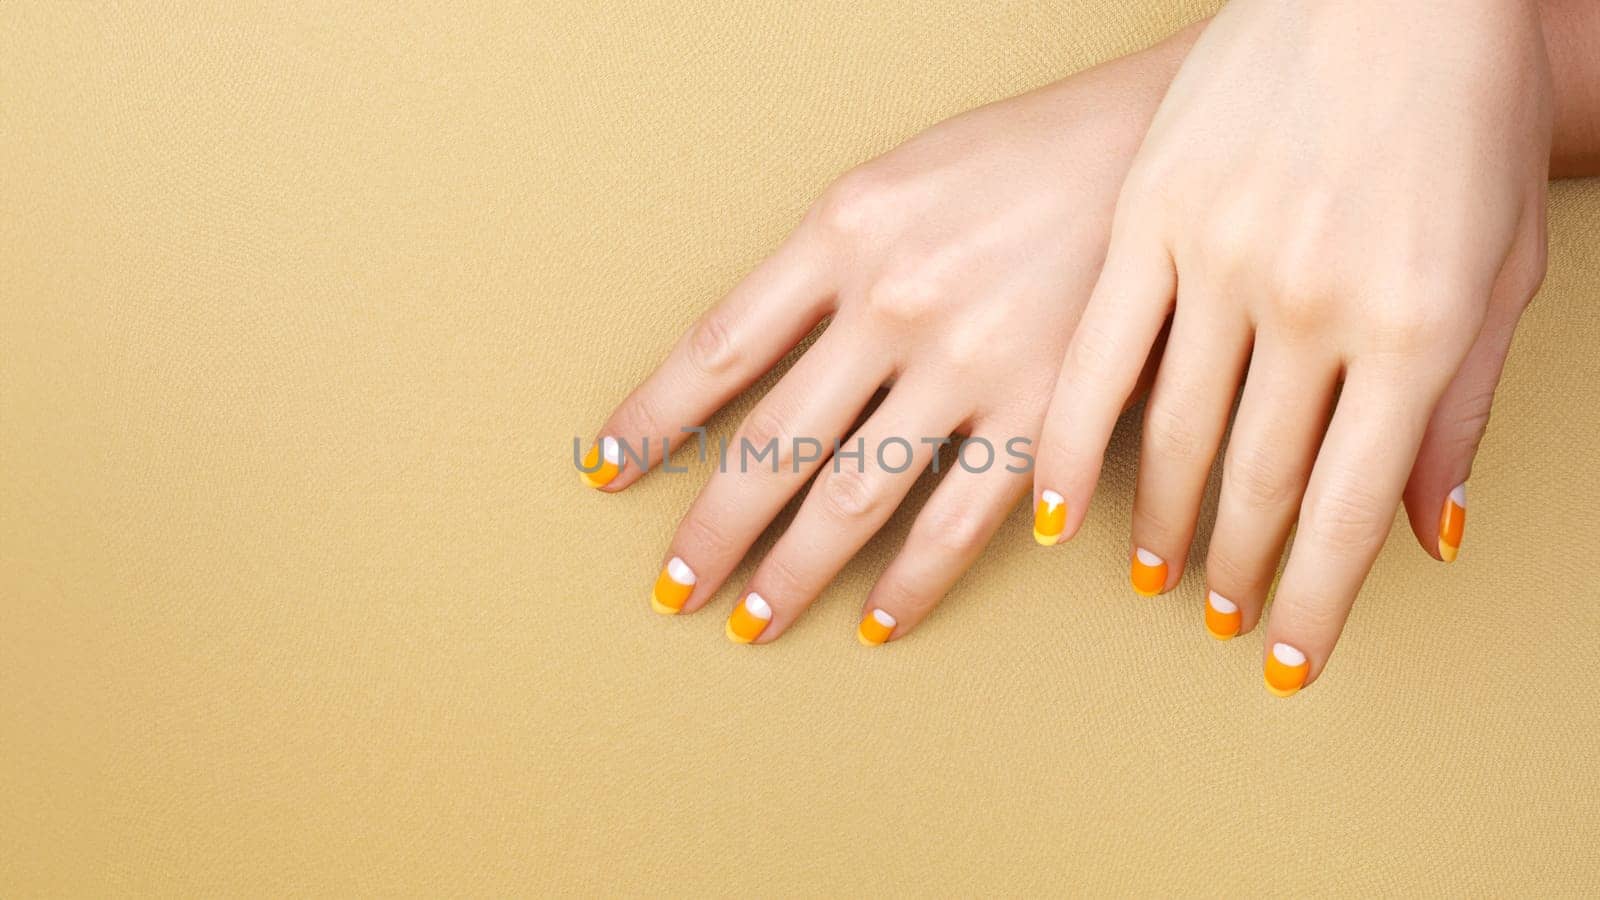 Beautiful Female Hands with bright orange Manicure like Candy Corn. Manicured Nails with Yellow Gel Polish. Halloween Style by MarinaFrost